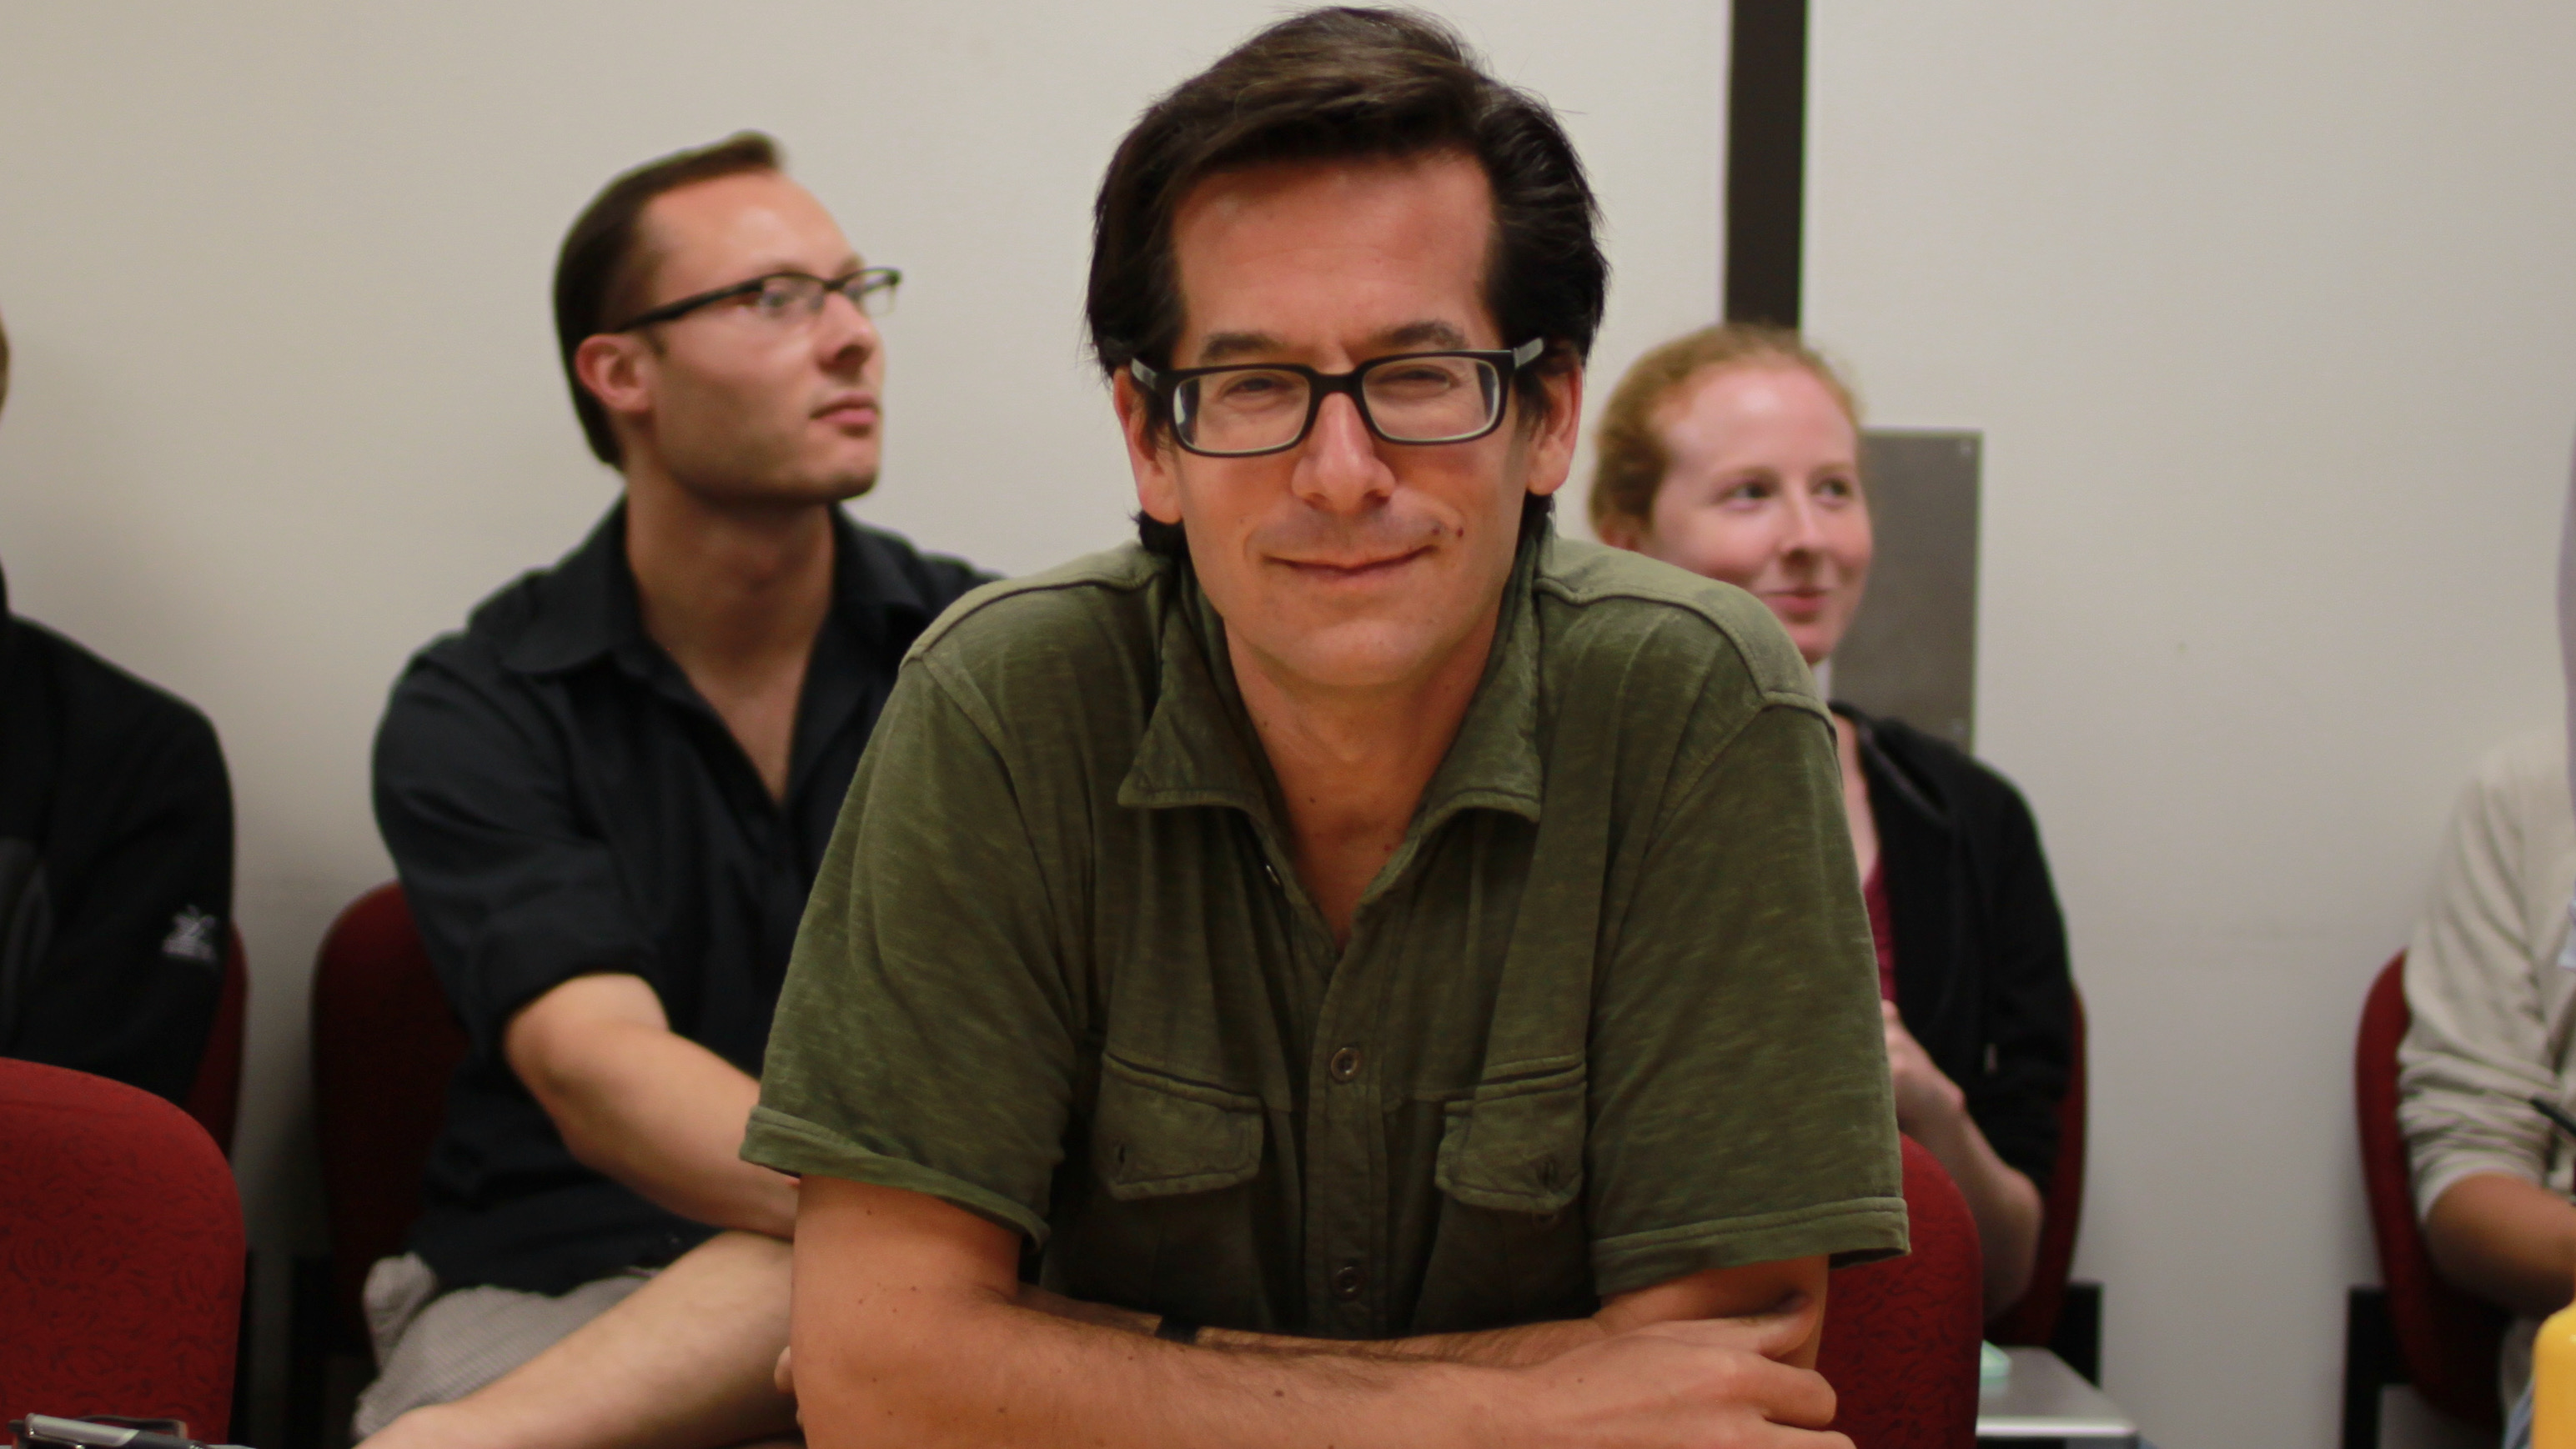 Linguistics faculty Jeff Lidz sitting at a meeting and looking skeptically at the camera, with humor.